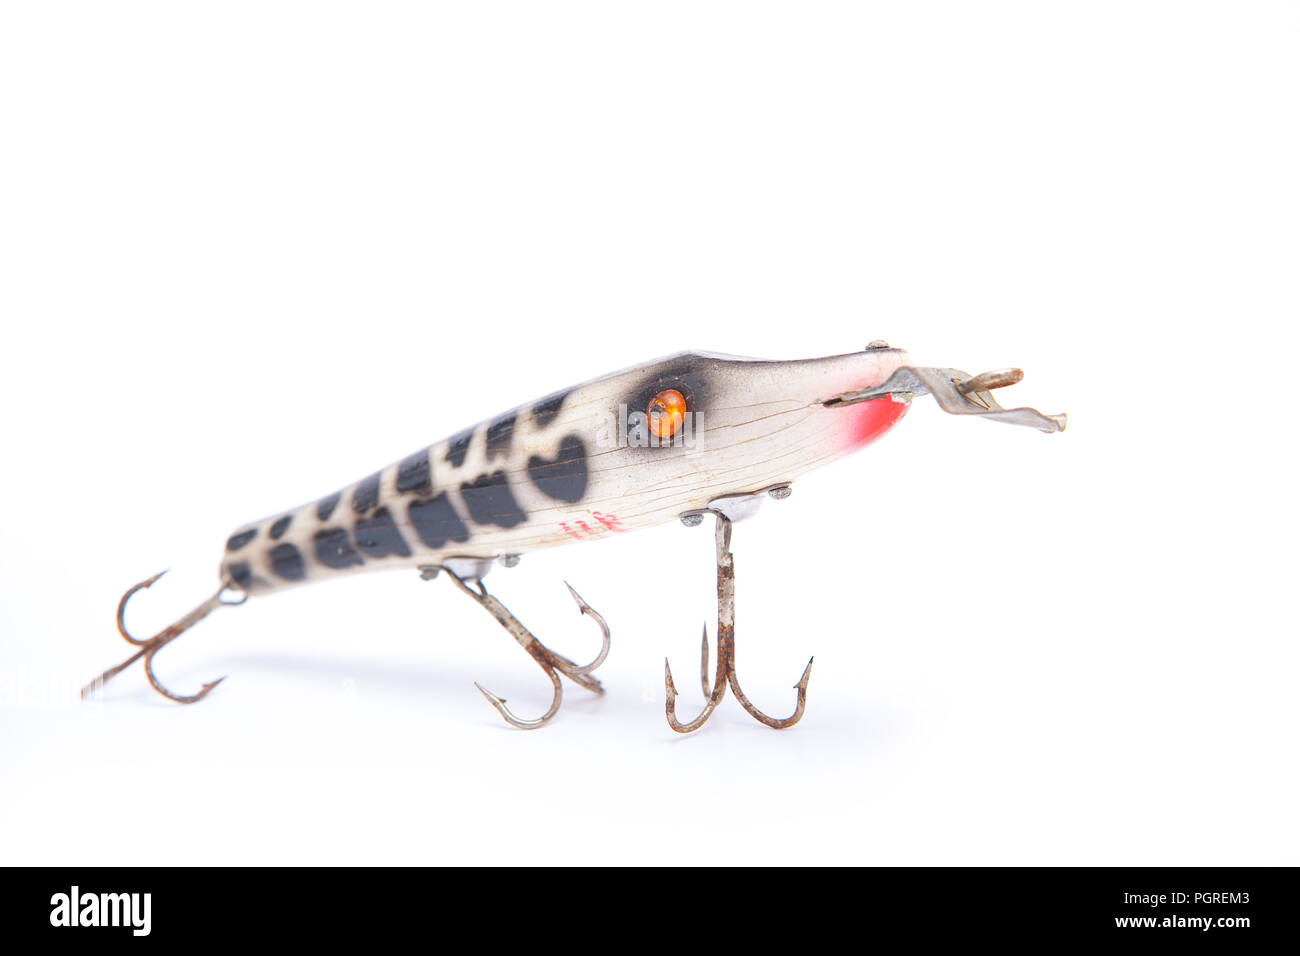 An old wooden Shakespeare fishing lure, or plug, equipped with three treble hooks and designed to dive whe it is reeled in. From a collection of vinta Stock Photo